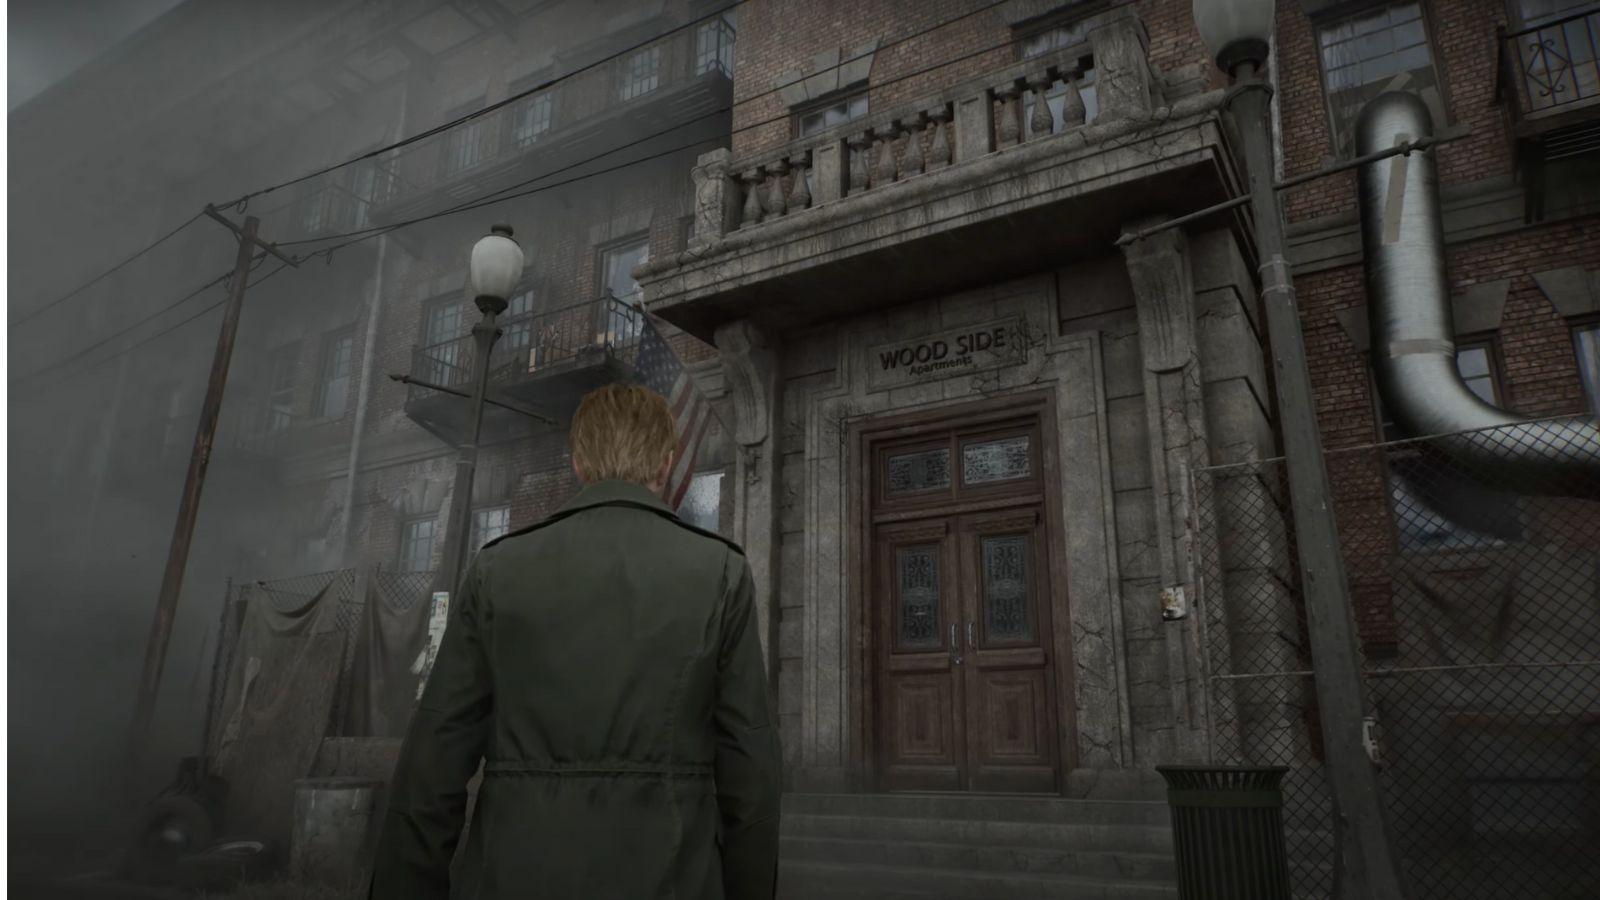 Silent Hill f: Trailer, setting, & everything we know so far - Dexerto